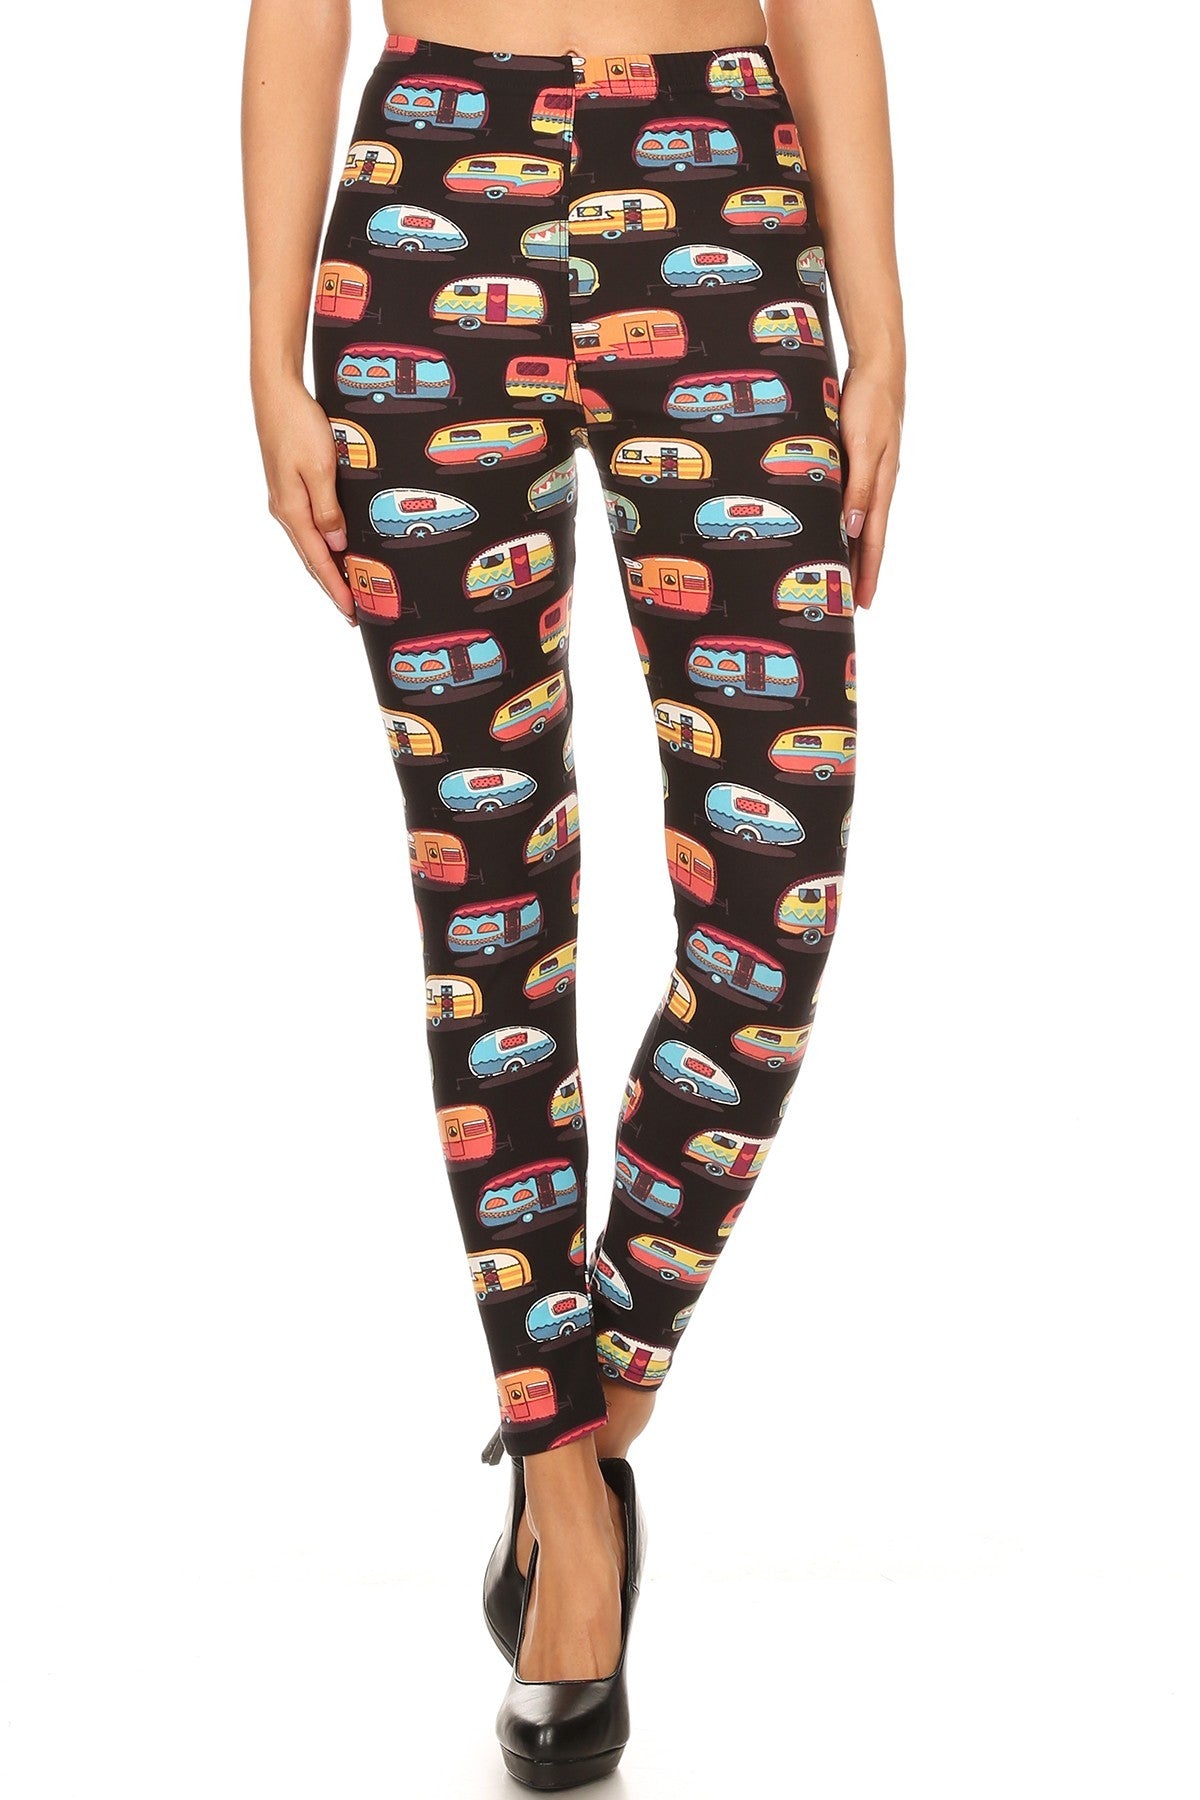 Os Multicolored Campers Printed, High Waisted Leggings In A Fit Style, With An Elastic Waistband